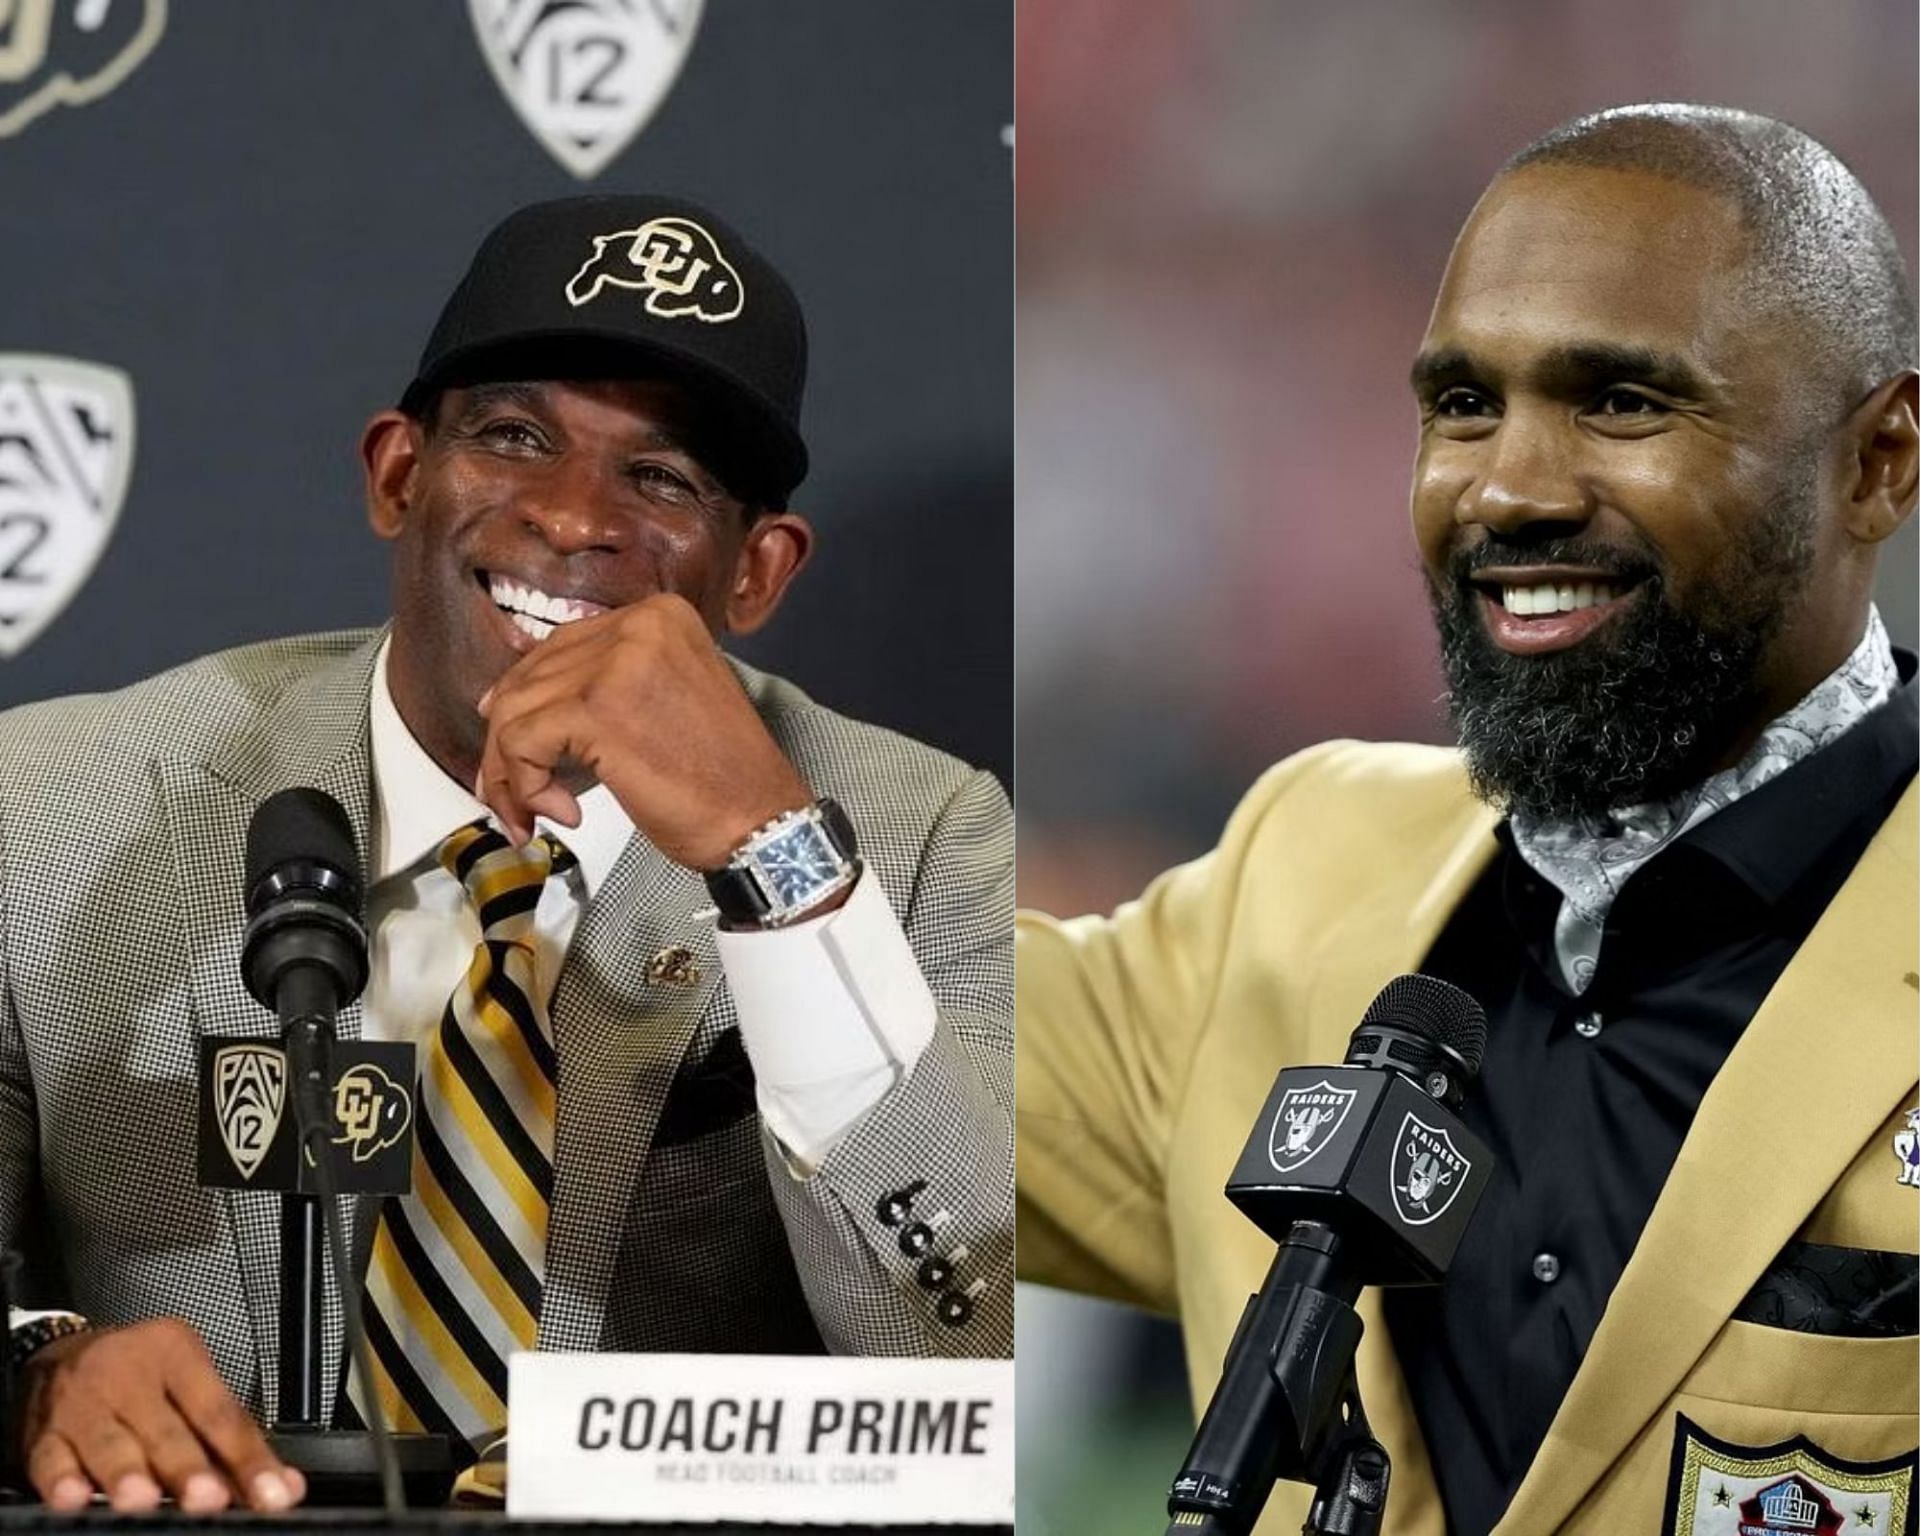 Deion Sanders and Charles Woodson